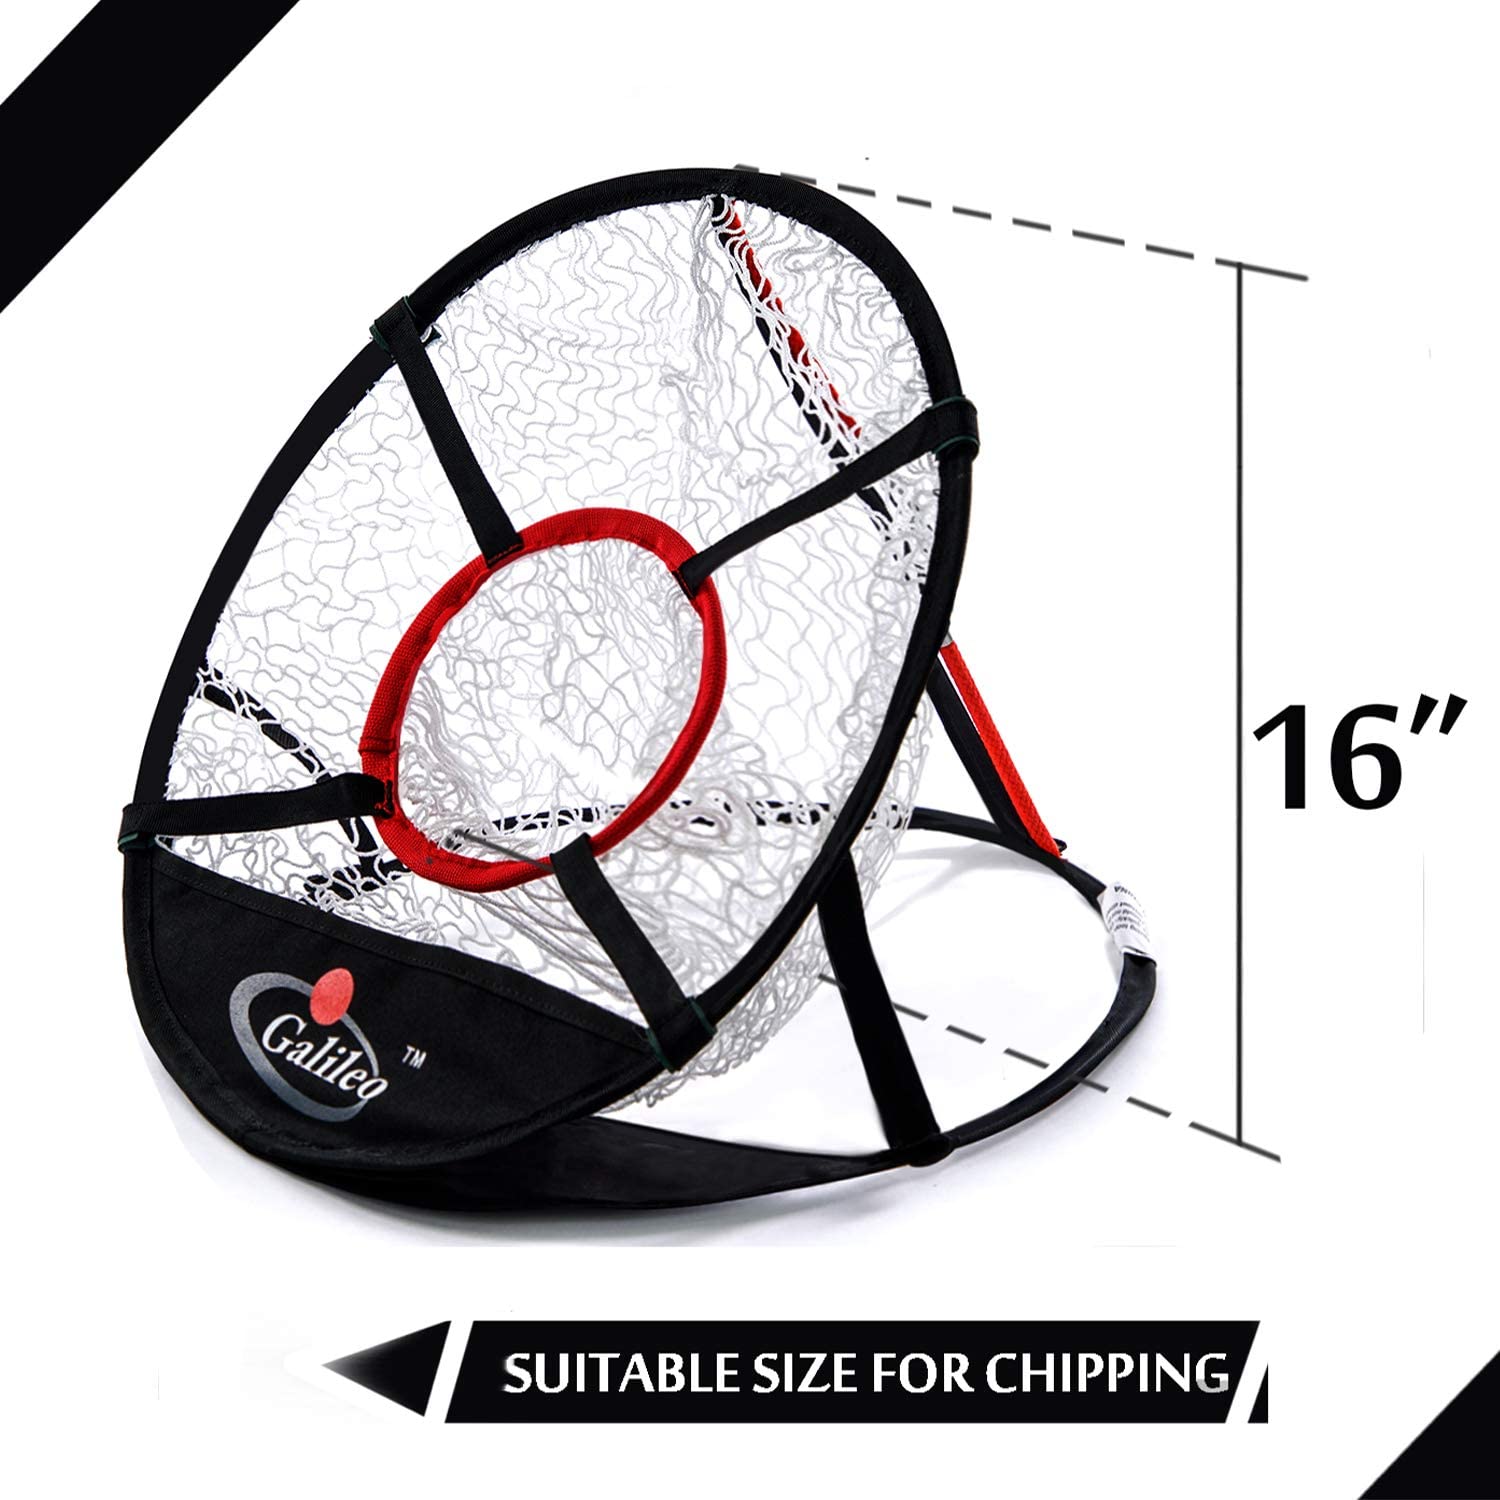 Galileo Sports Golf Chipping Net Golf Chipping Net Chipping Golf Chipping Practice Net Pop Up Golf Chipping Net Golf Chipping Game Indoor Outdoor Use